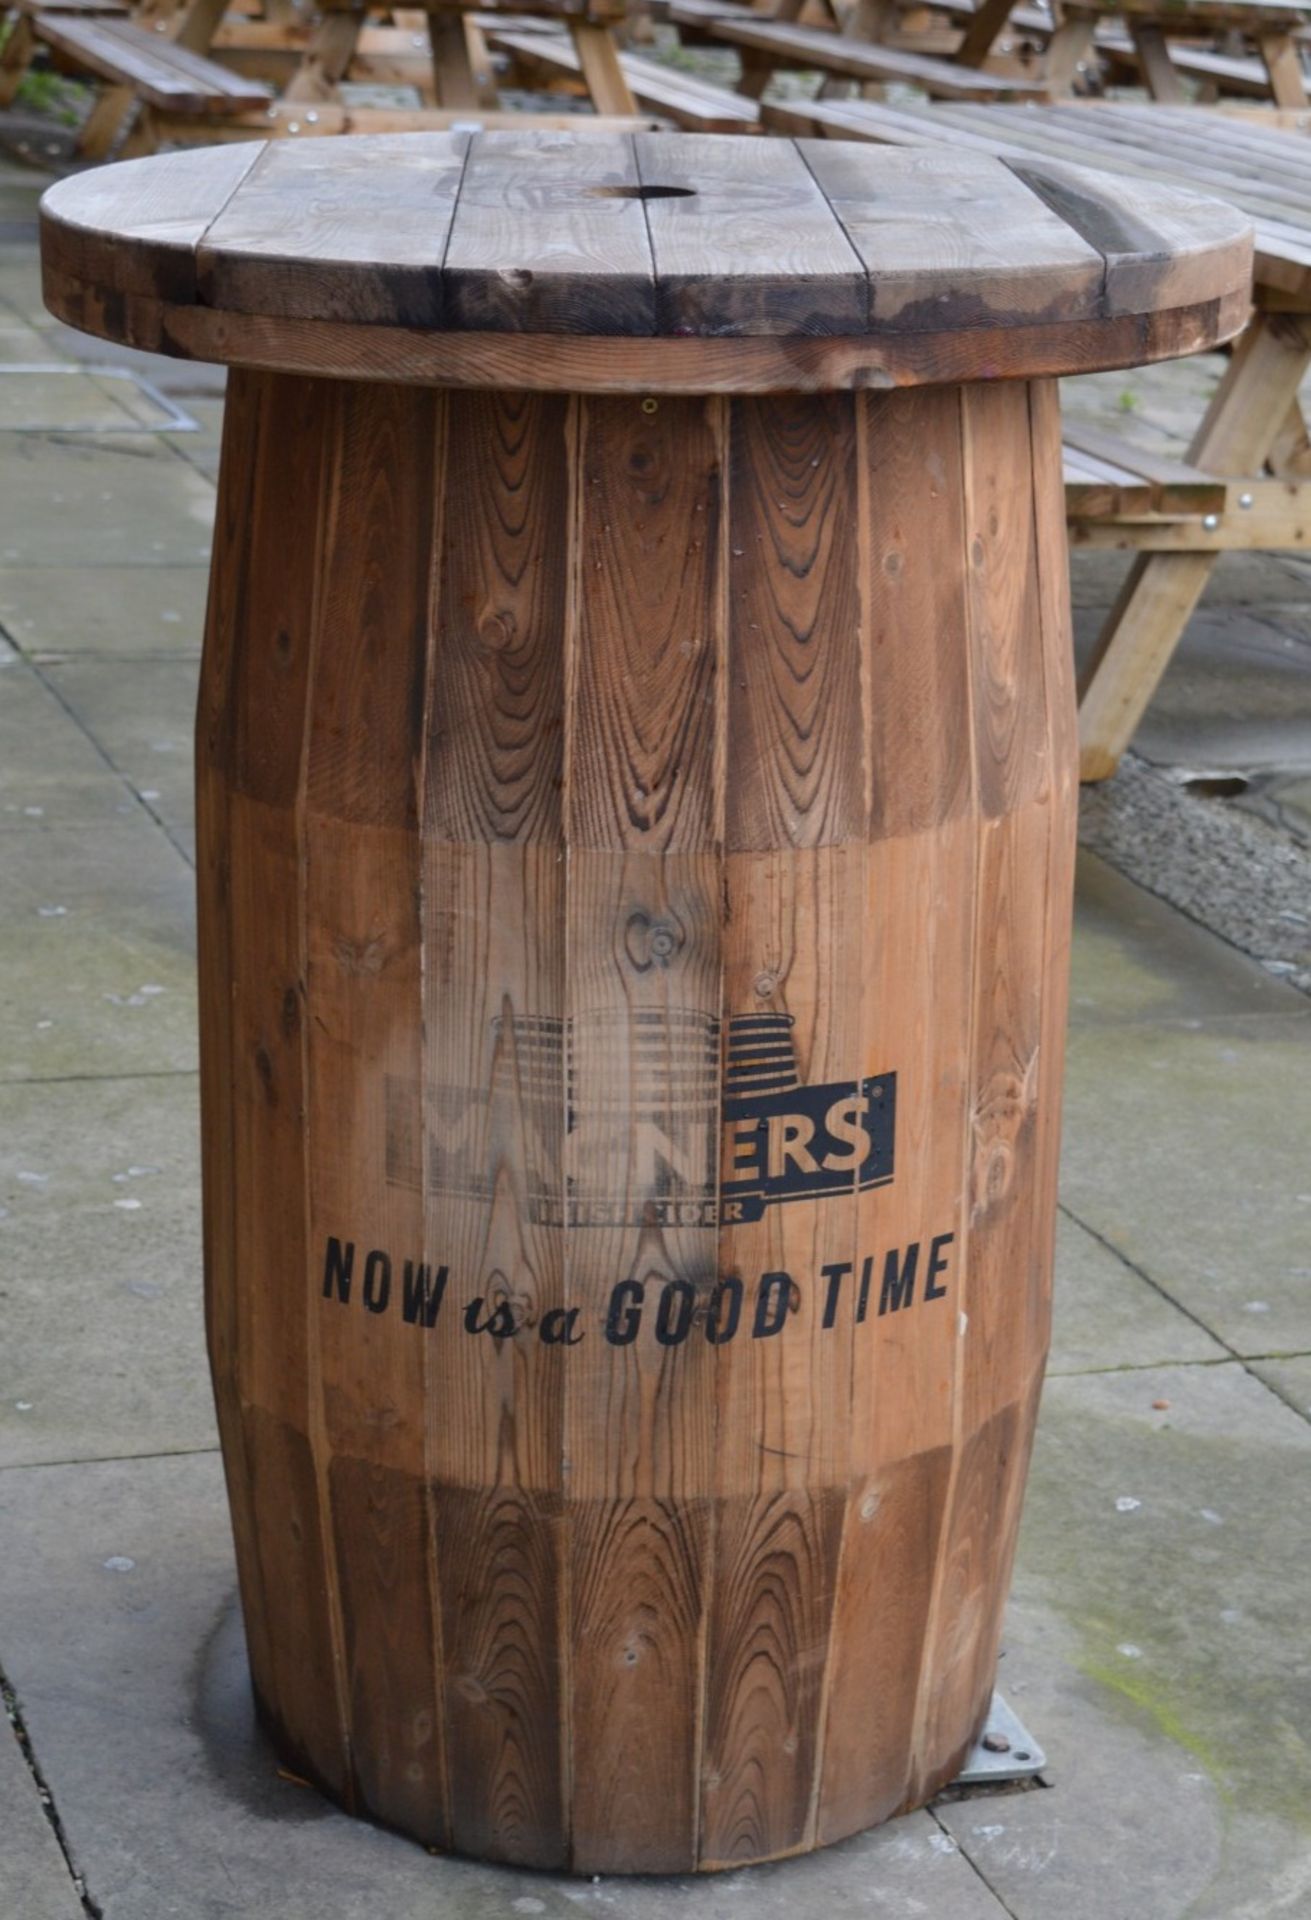 1 x Poser Pub Barrel Table - With Magners Logo - Designed For 4 People to Sit or Stand Around -